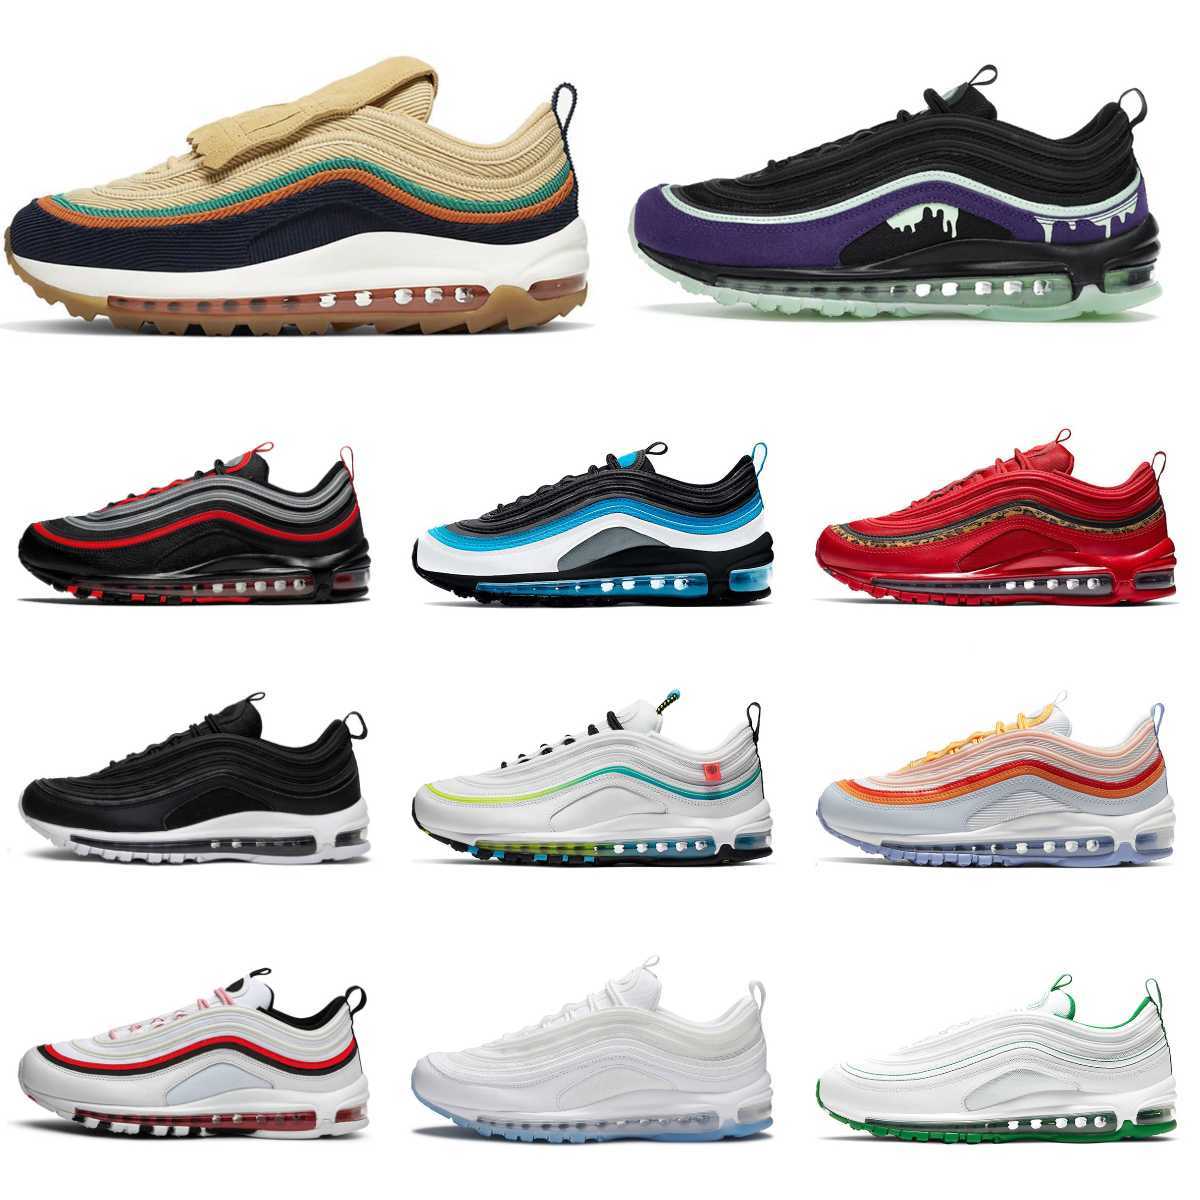 

Train Max 97 Mens Casual Shoes MSCHF X INRI Jesus Undefeated Black Summit Triple White Metalic Gold Women Designer Air 97s Sean Wotherspoon Sliver Bullet Sneakers S29, Please contact us